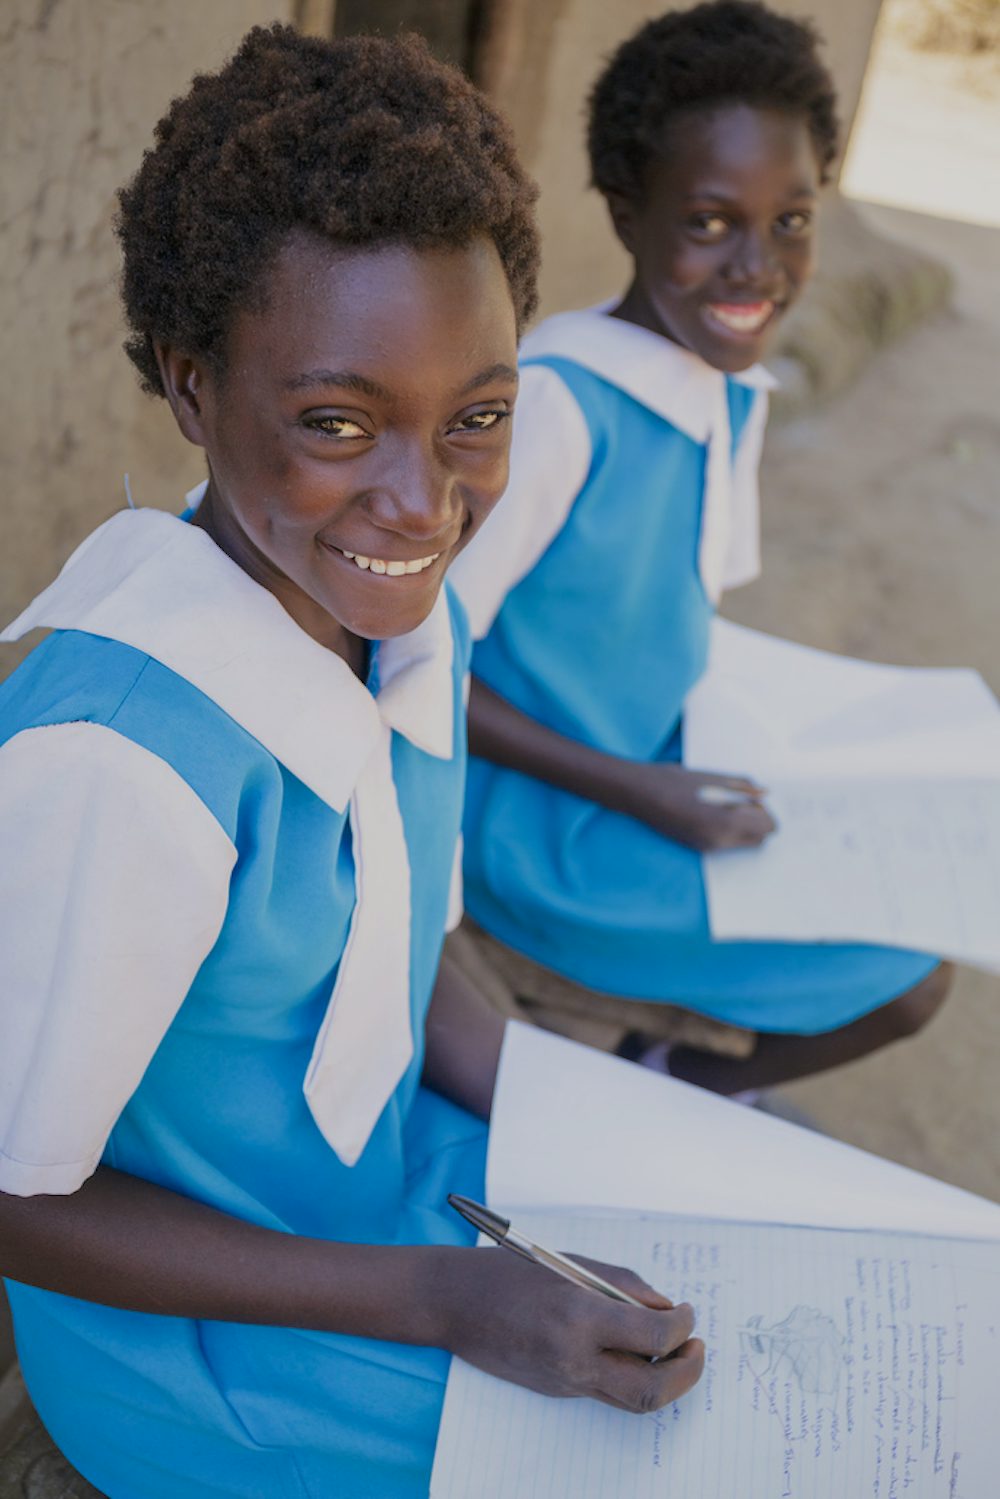 A 13 year old girl in a blue and white school uniform looks smiling while writing with a pencil on paper.